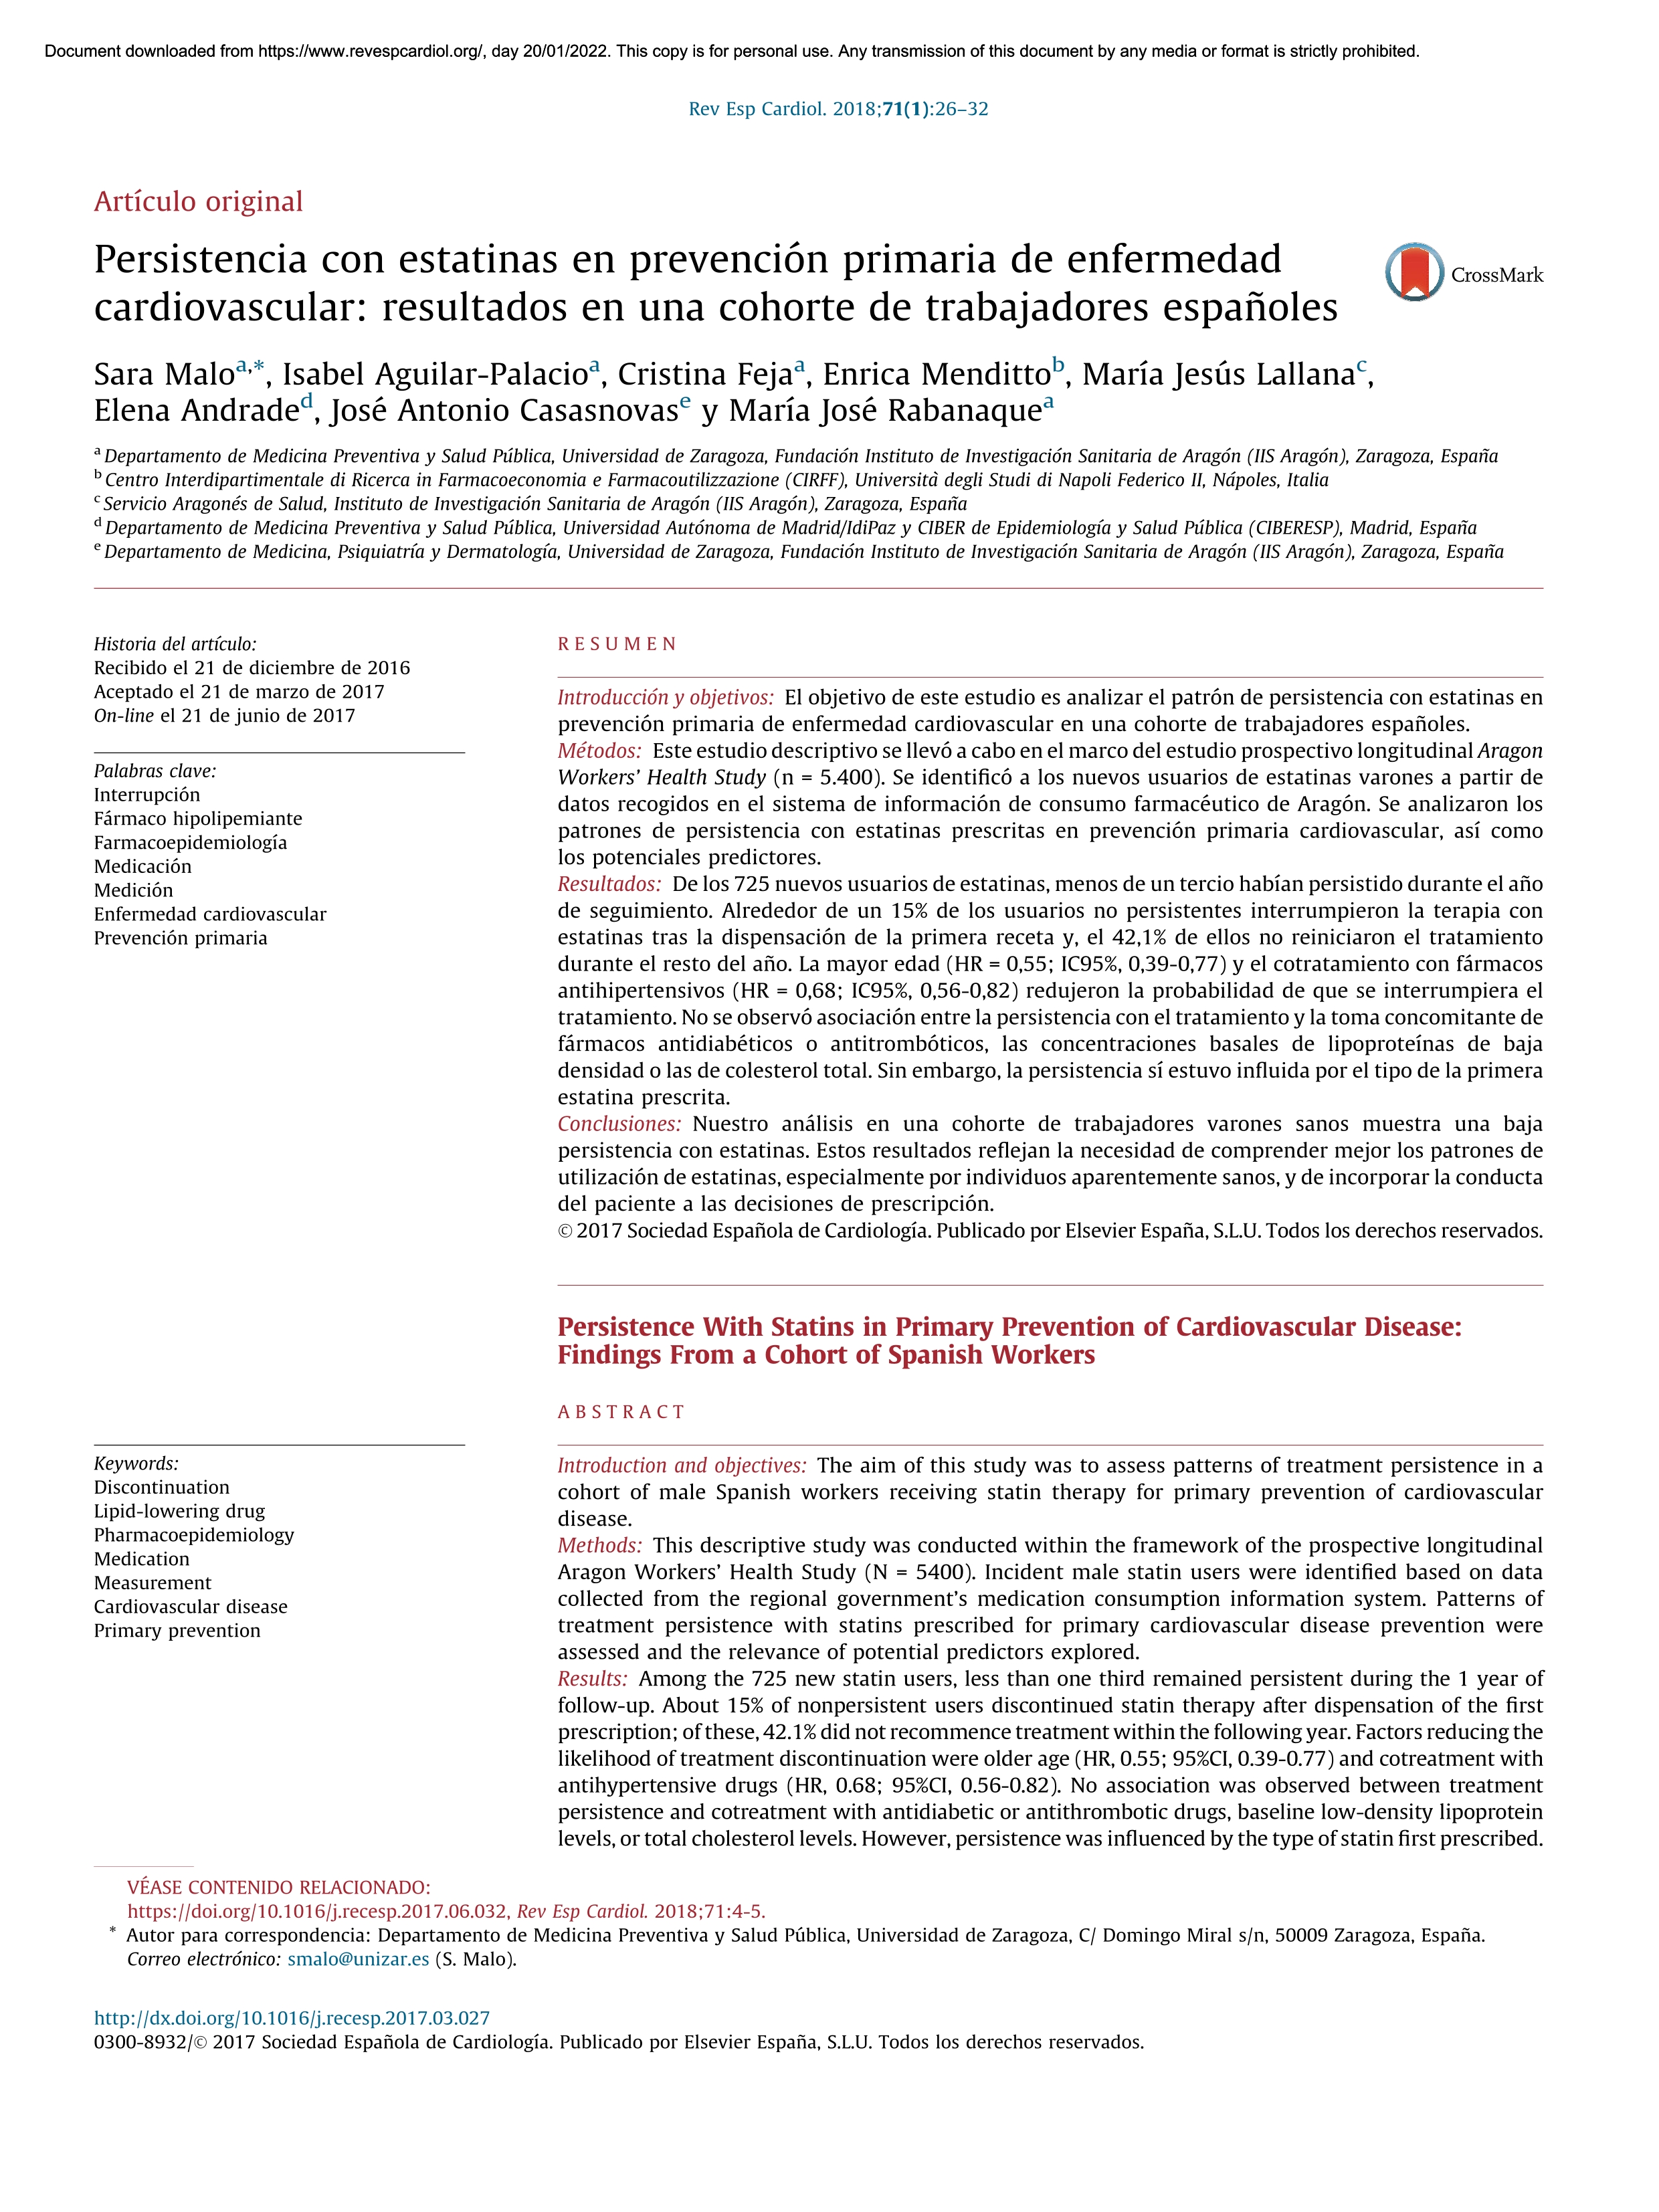 Persistence with statins in primary prevention of cardiovascular disease: findings from a cohort of spanish workers